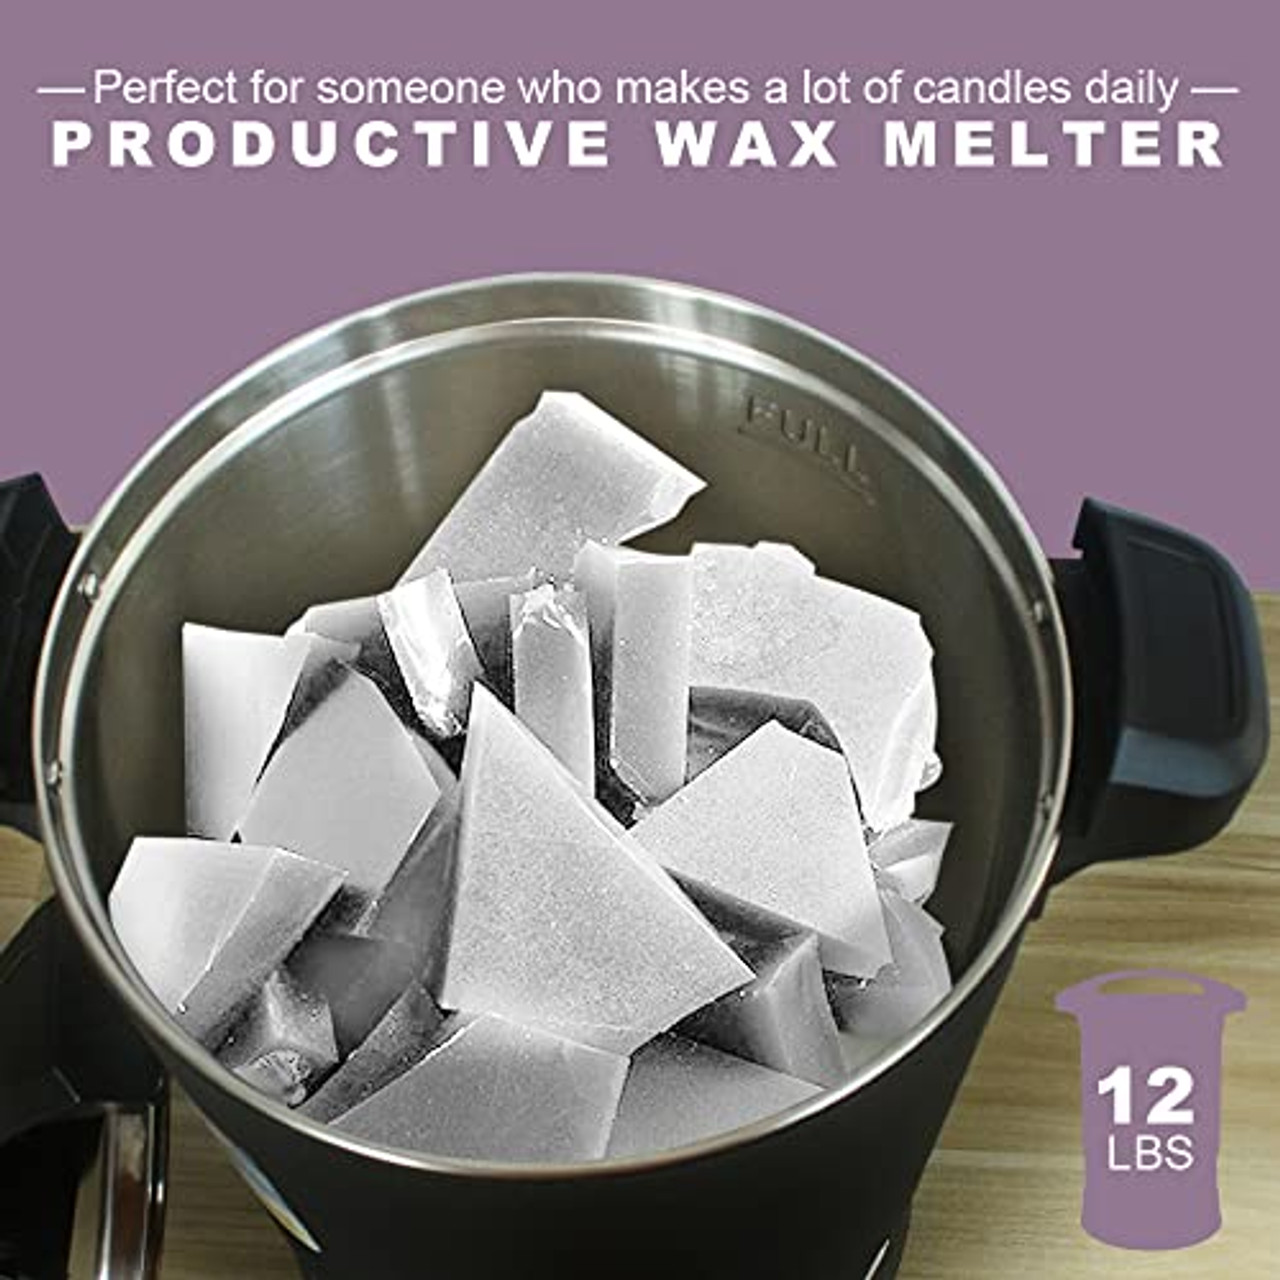 Craft & Venture Wax Melter for Candle Making - Candle Wax Melting Pot Holds 7qts (14lbs) of Wax – Soap Melter for Soap Making Supplies - Easy Pour